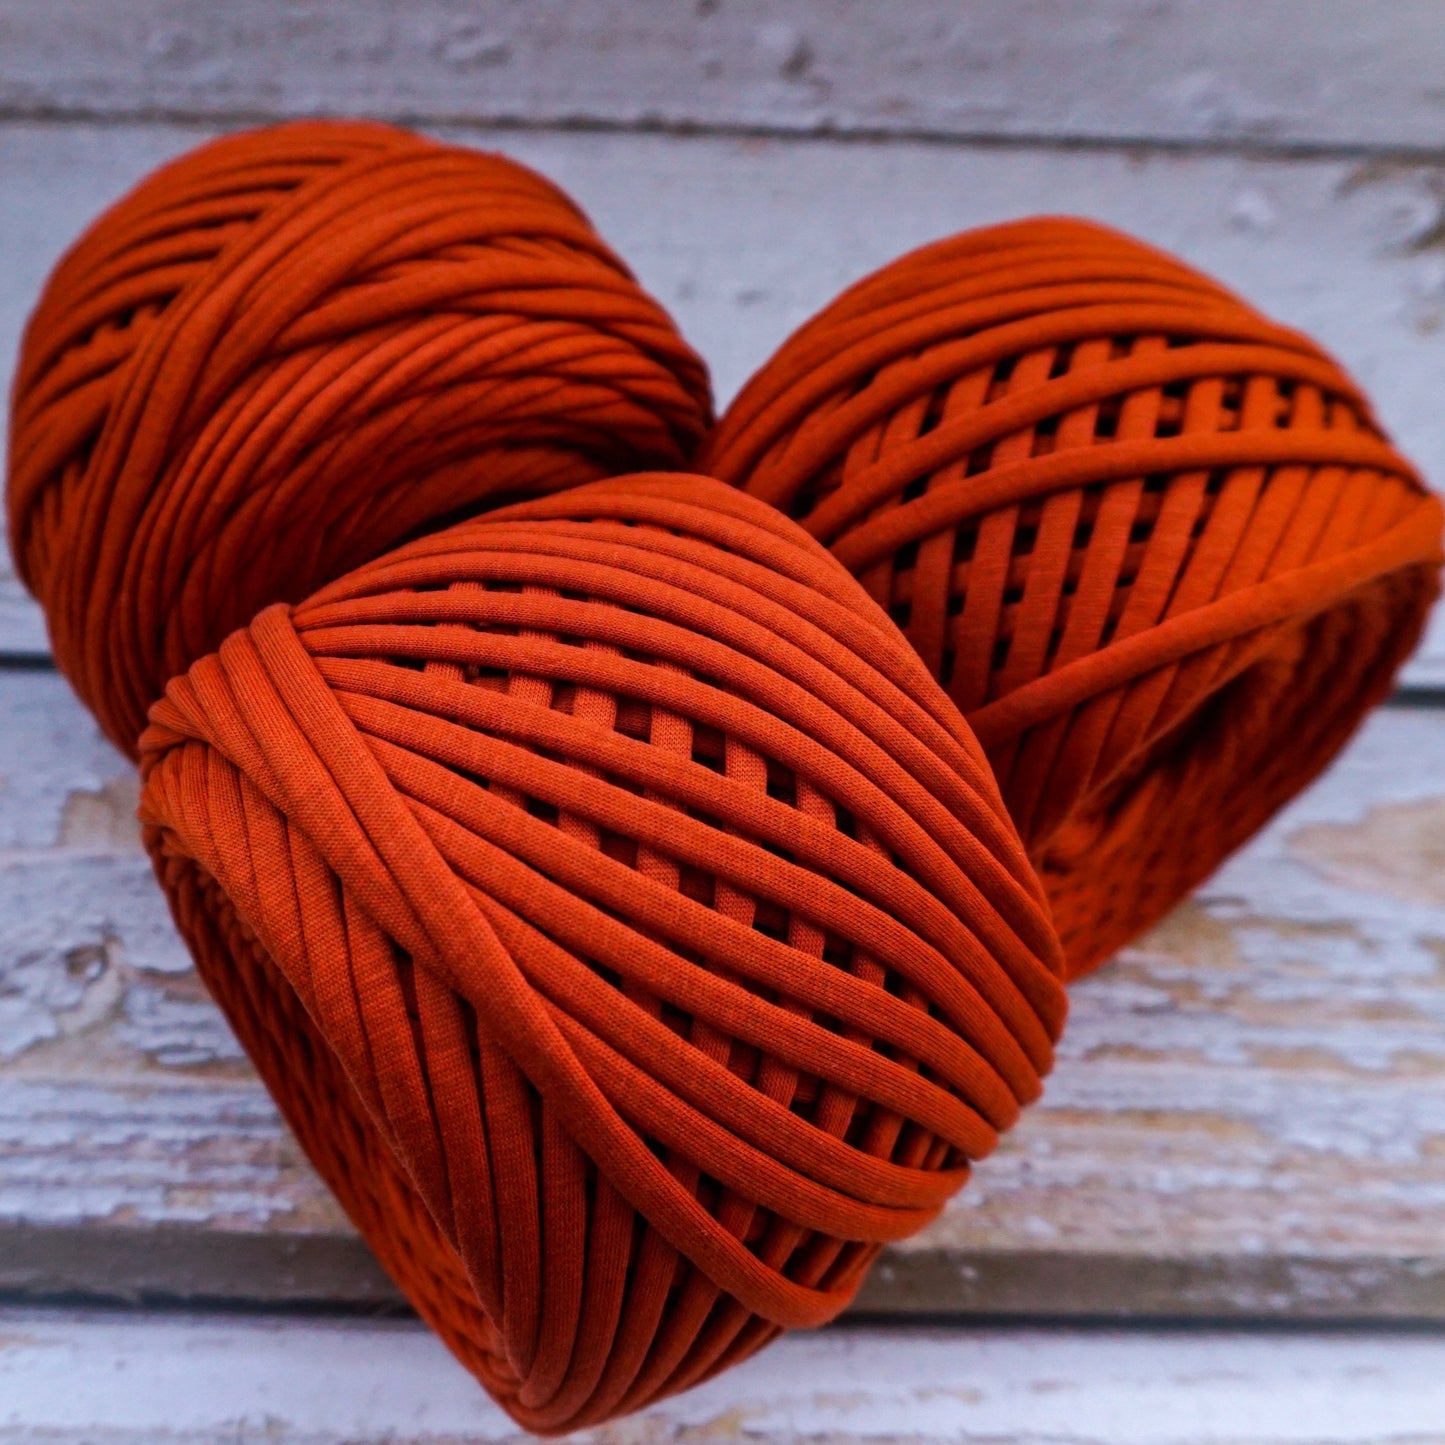 T-shirt yarn for crocheting baskets, bags, rugs and home decor. Burnt orange